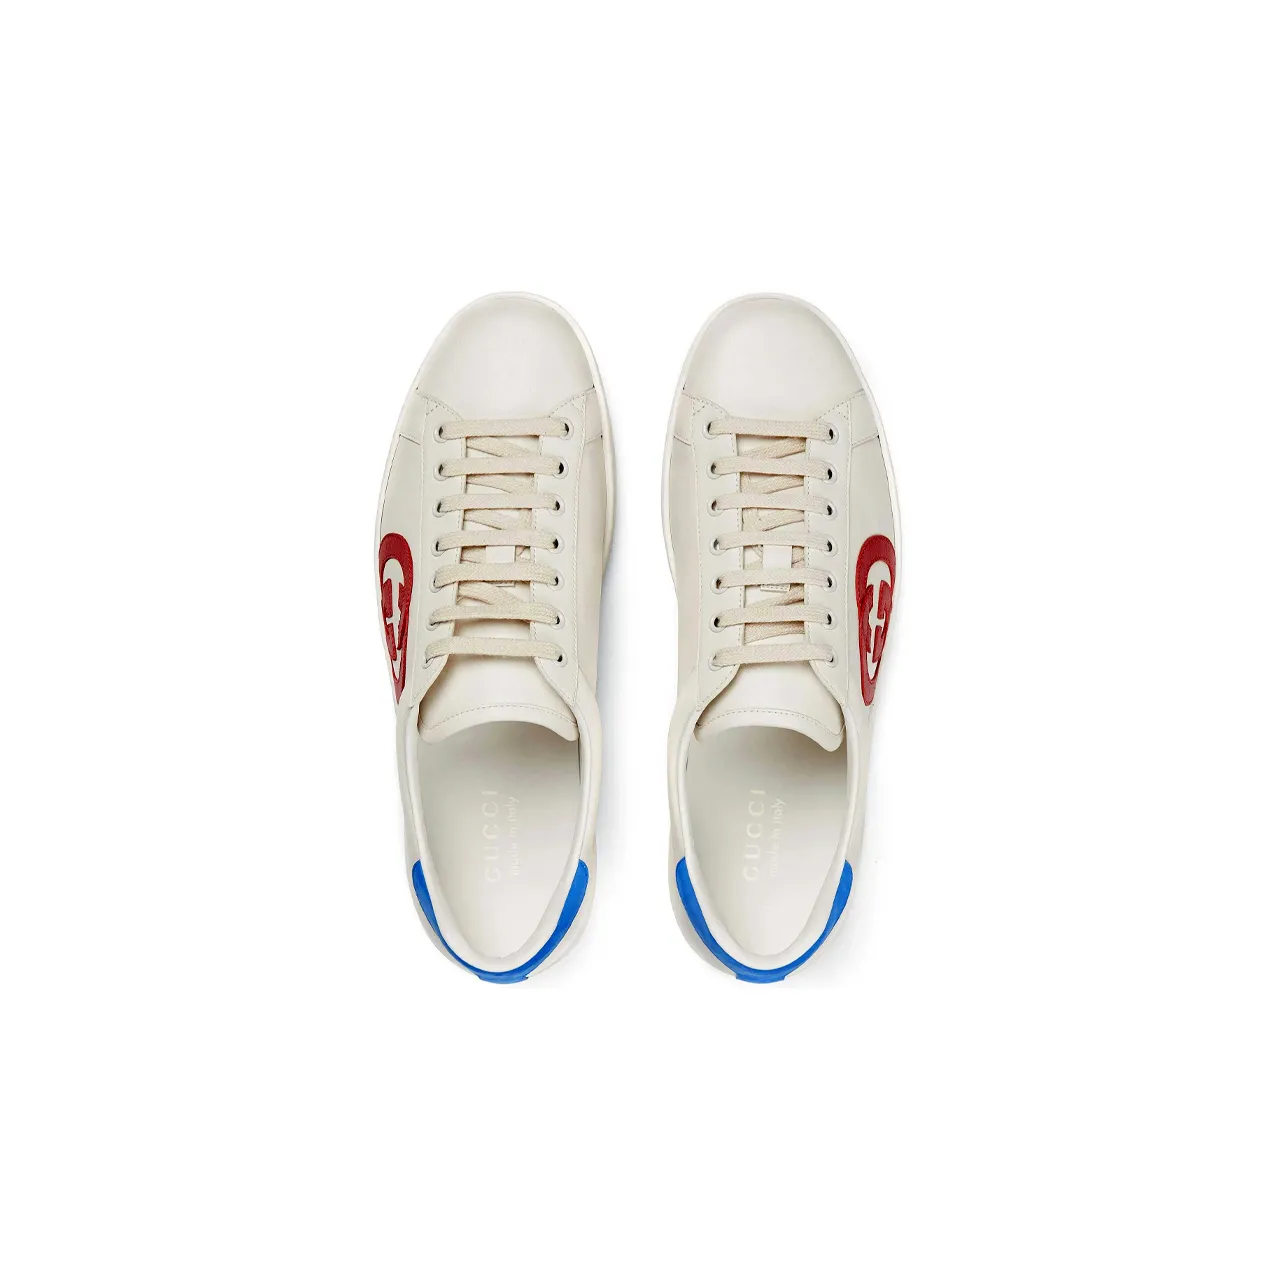 Gucci White Leather Interlocking G Ace Low Top Sneakers Size 39 Gucci